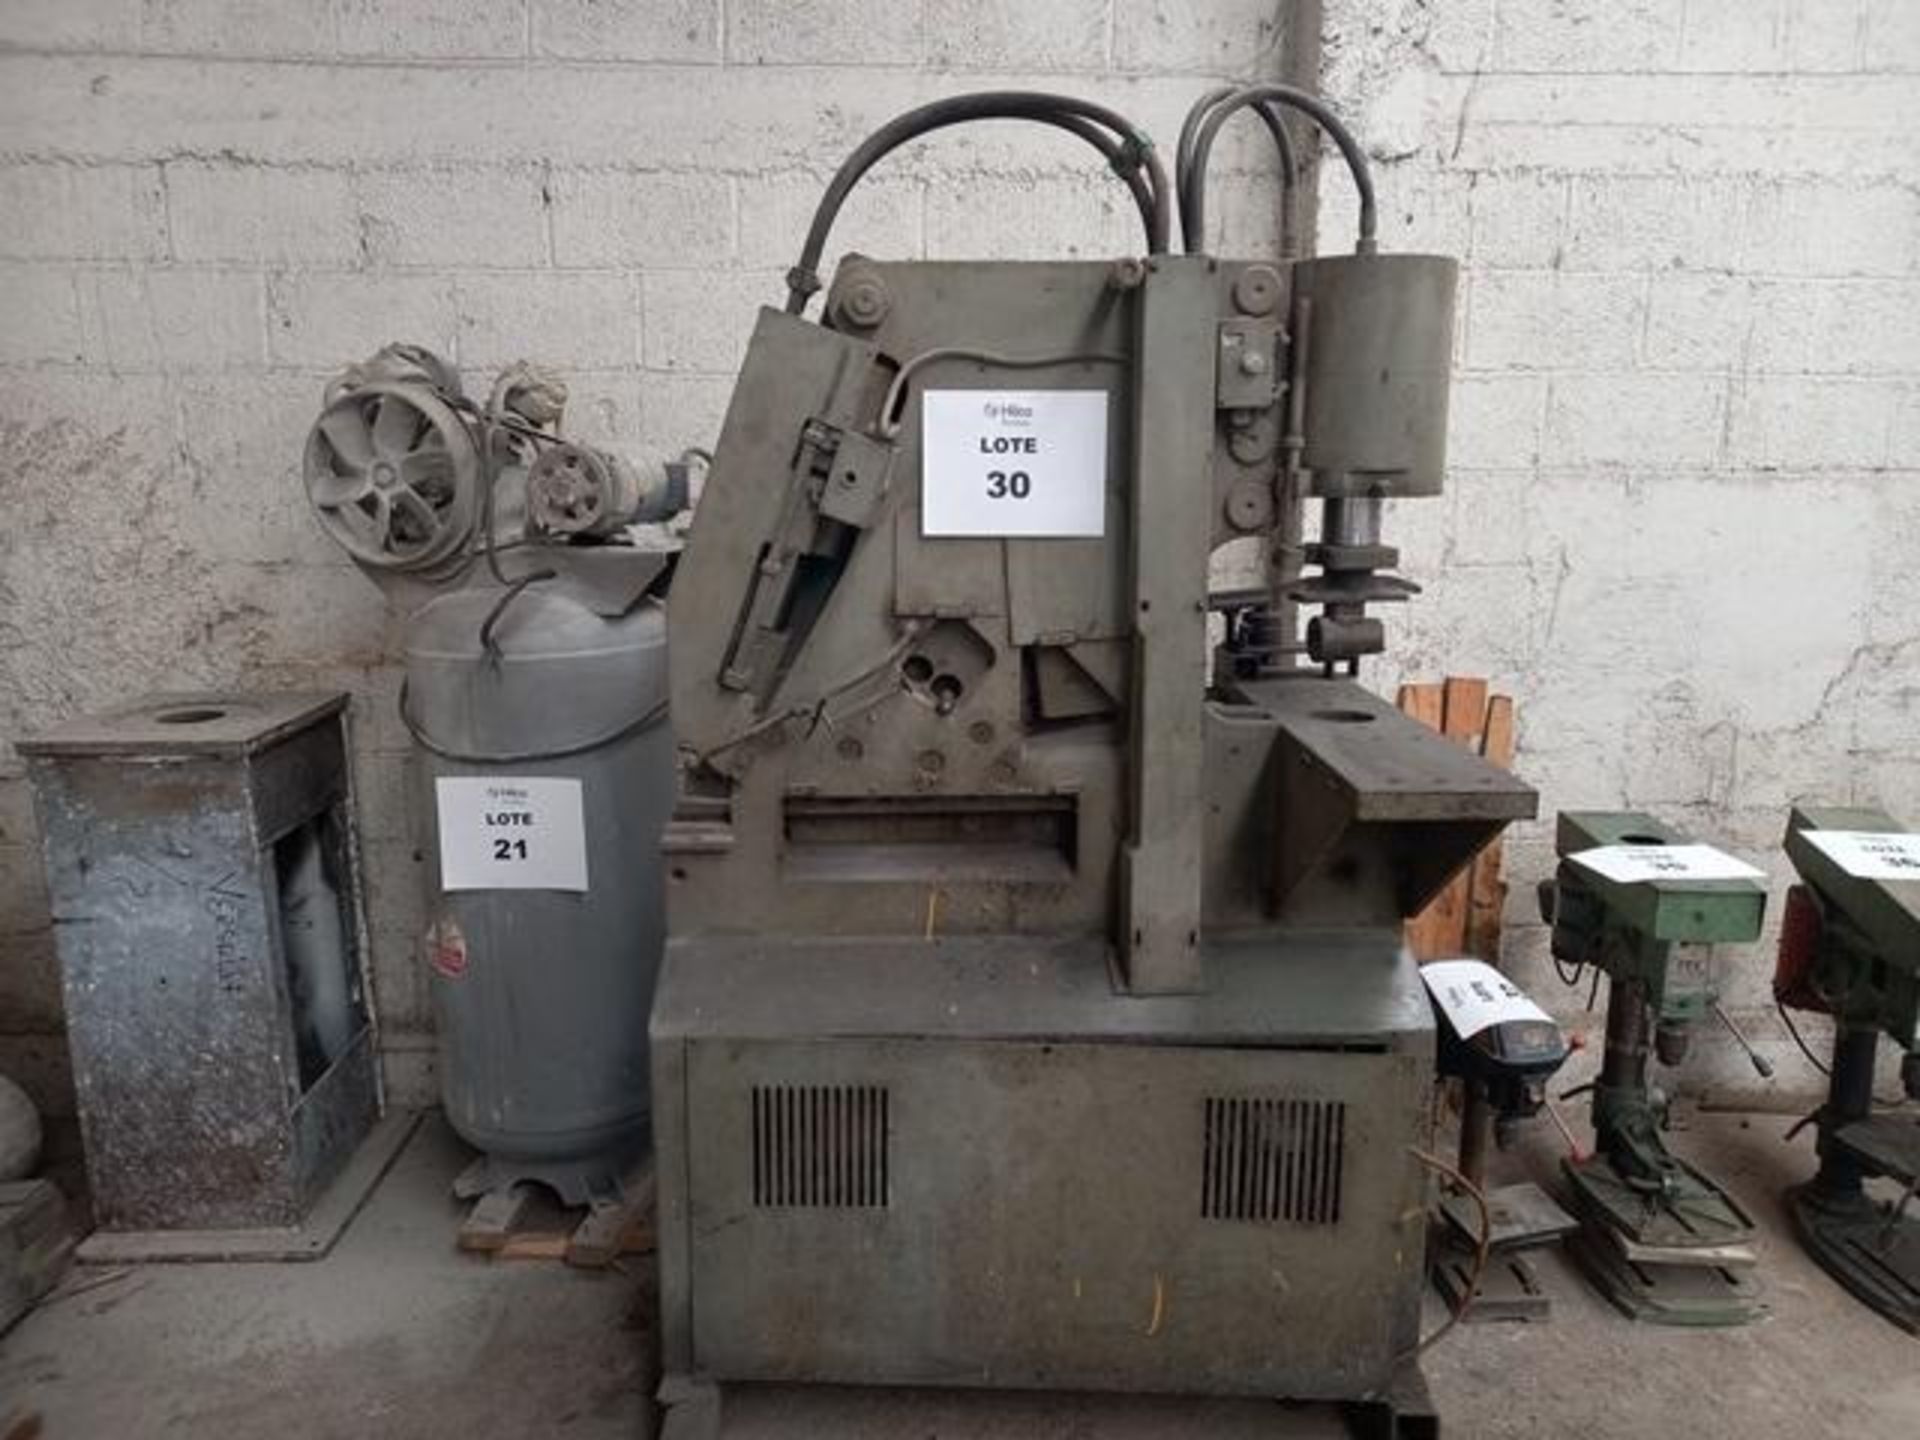 Mubea HIW 1000 Punching Machine, S/N: Illegible: Estimated Punching Capacity of 1000kn for a Maximum - Image 3 of 14